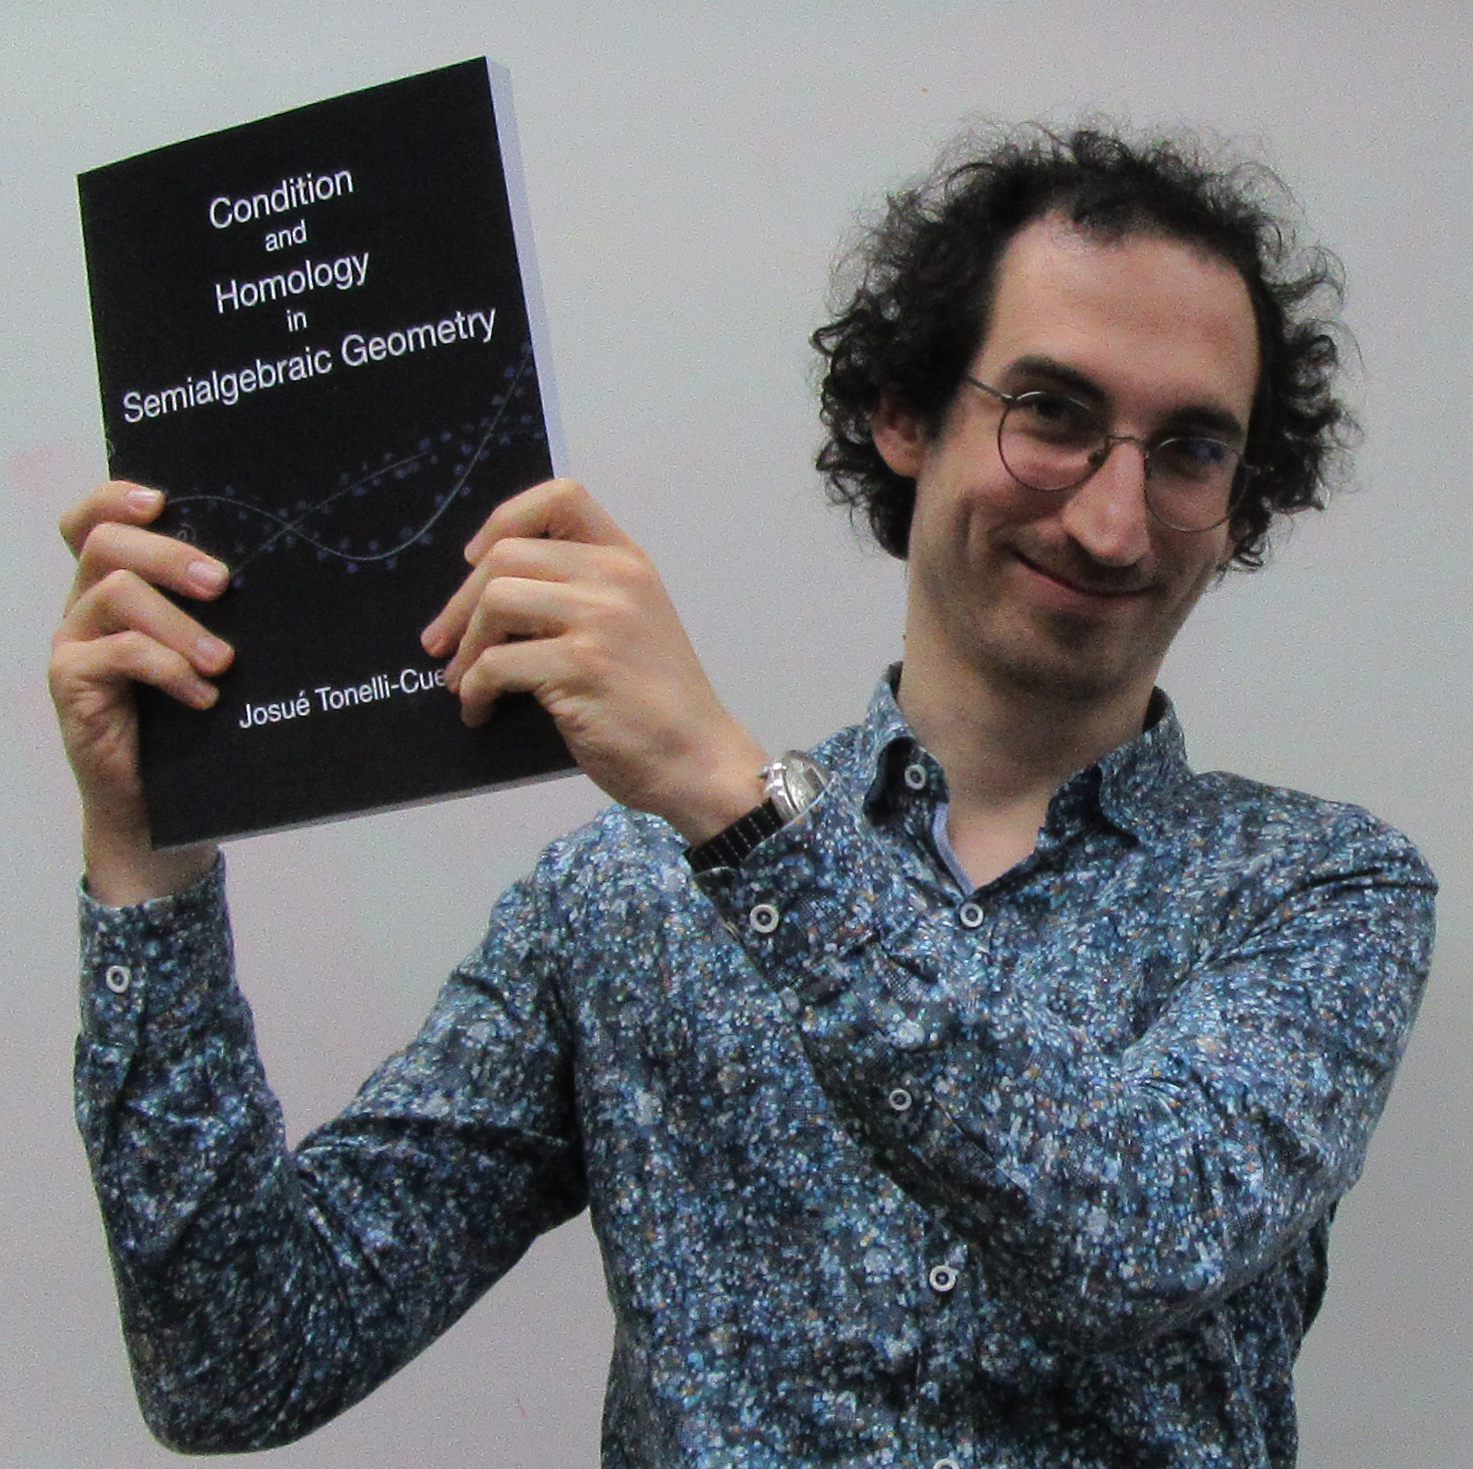 Josué Tonelli-Cueto holding a copy of his doctoral thesis